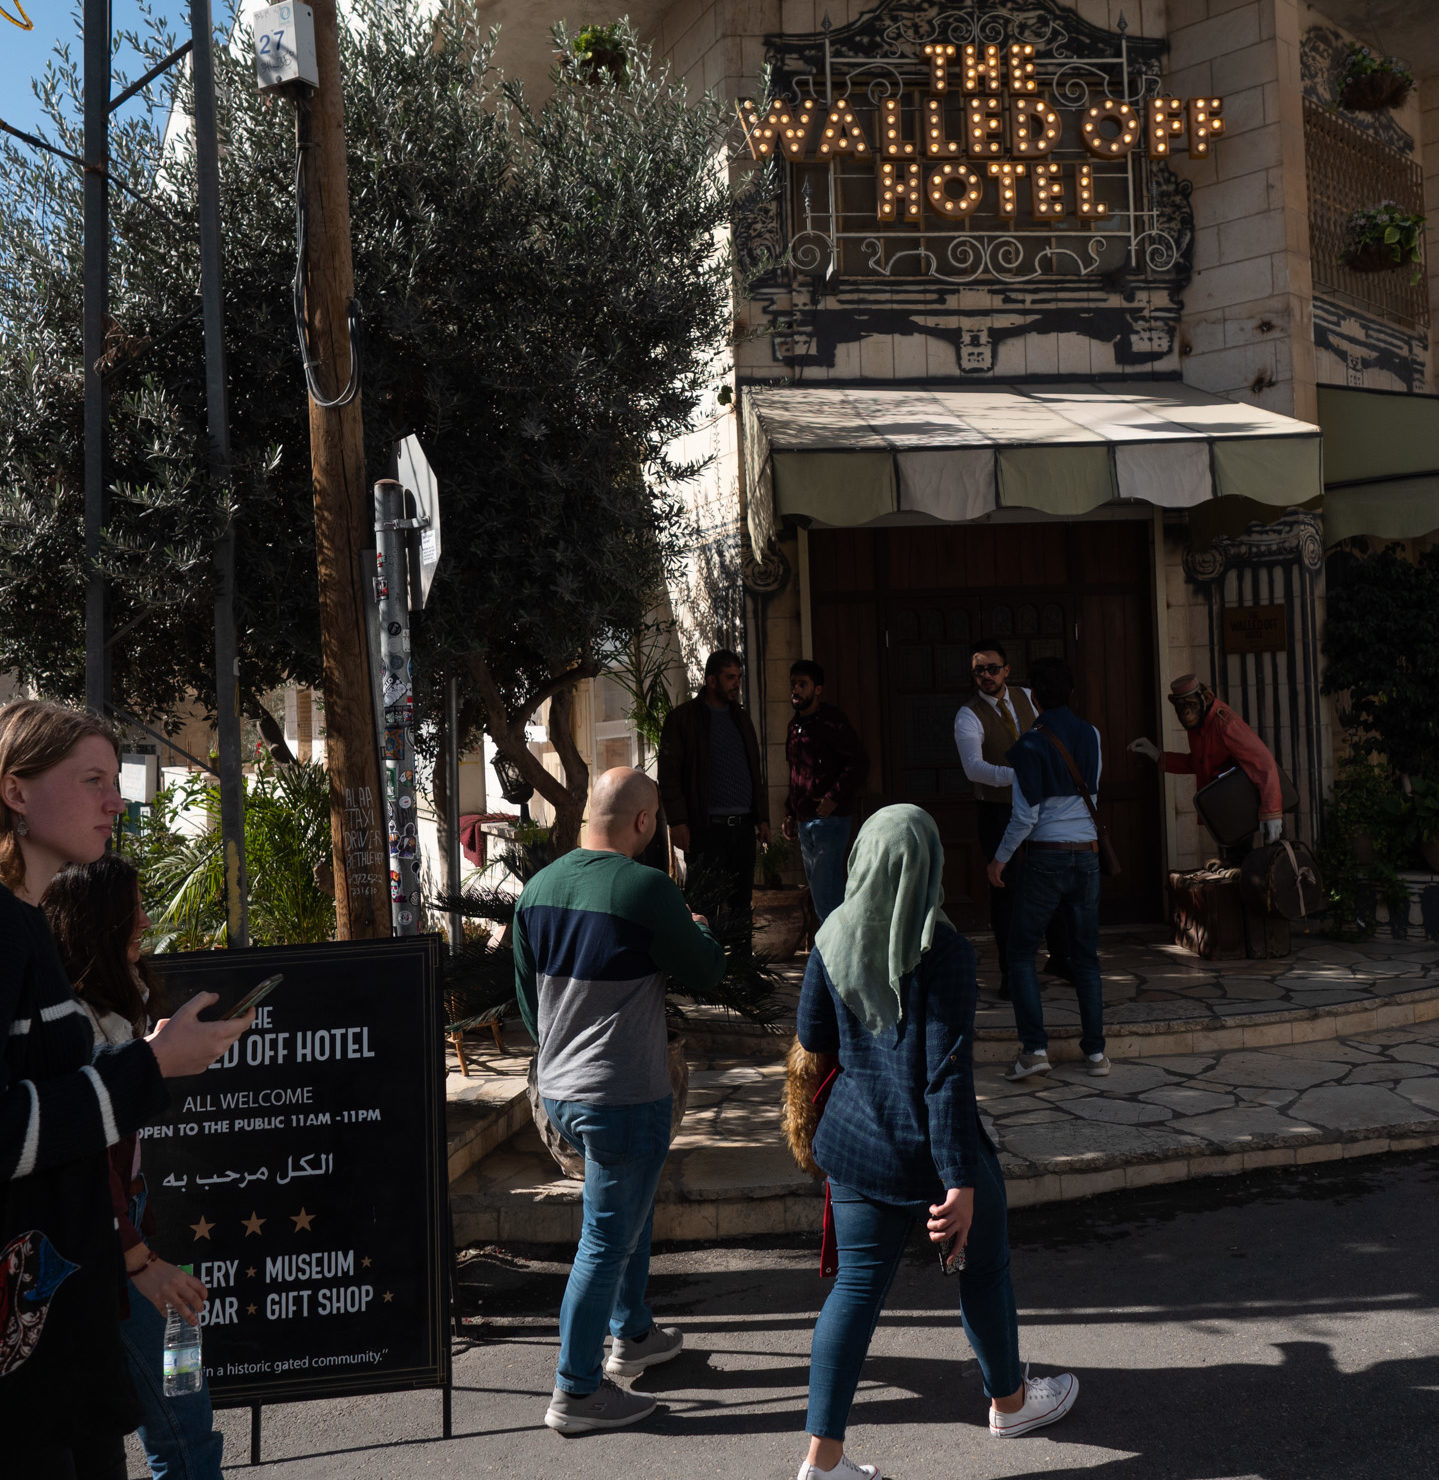 Since “The Walled Off Hotel” opened in 2017, it became one of the most visited sights in Palestine. Located between the "Rachel's Crossing" checkpoint to Jerusalem and the centre of Bethlehem, the project by the British street artist Banksy brings tourists from all over the world to one of the Israeli-Palestinian conflict hotspots. 